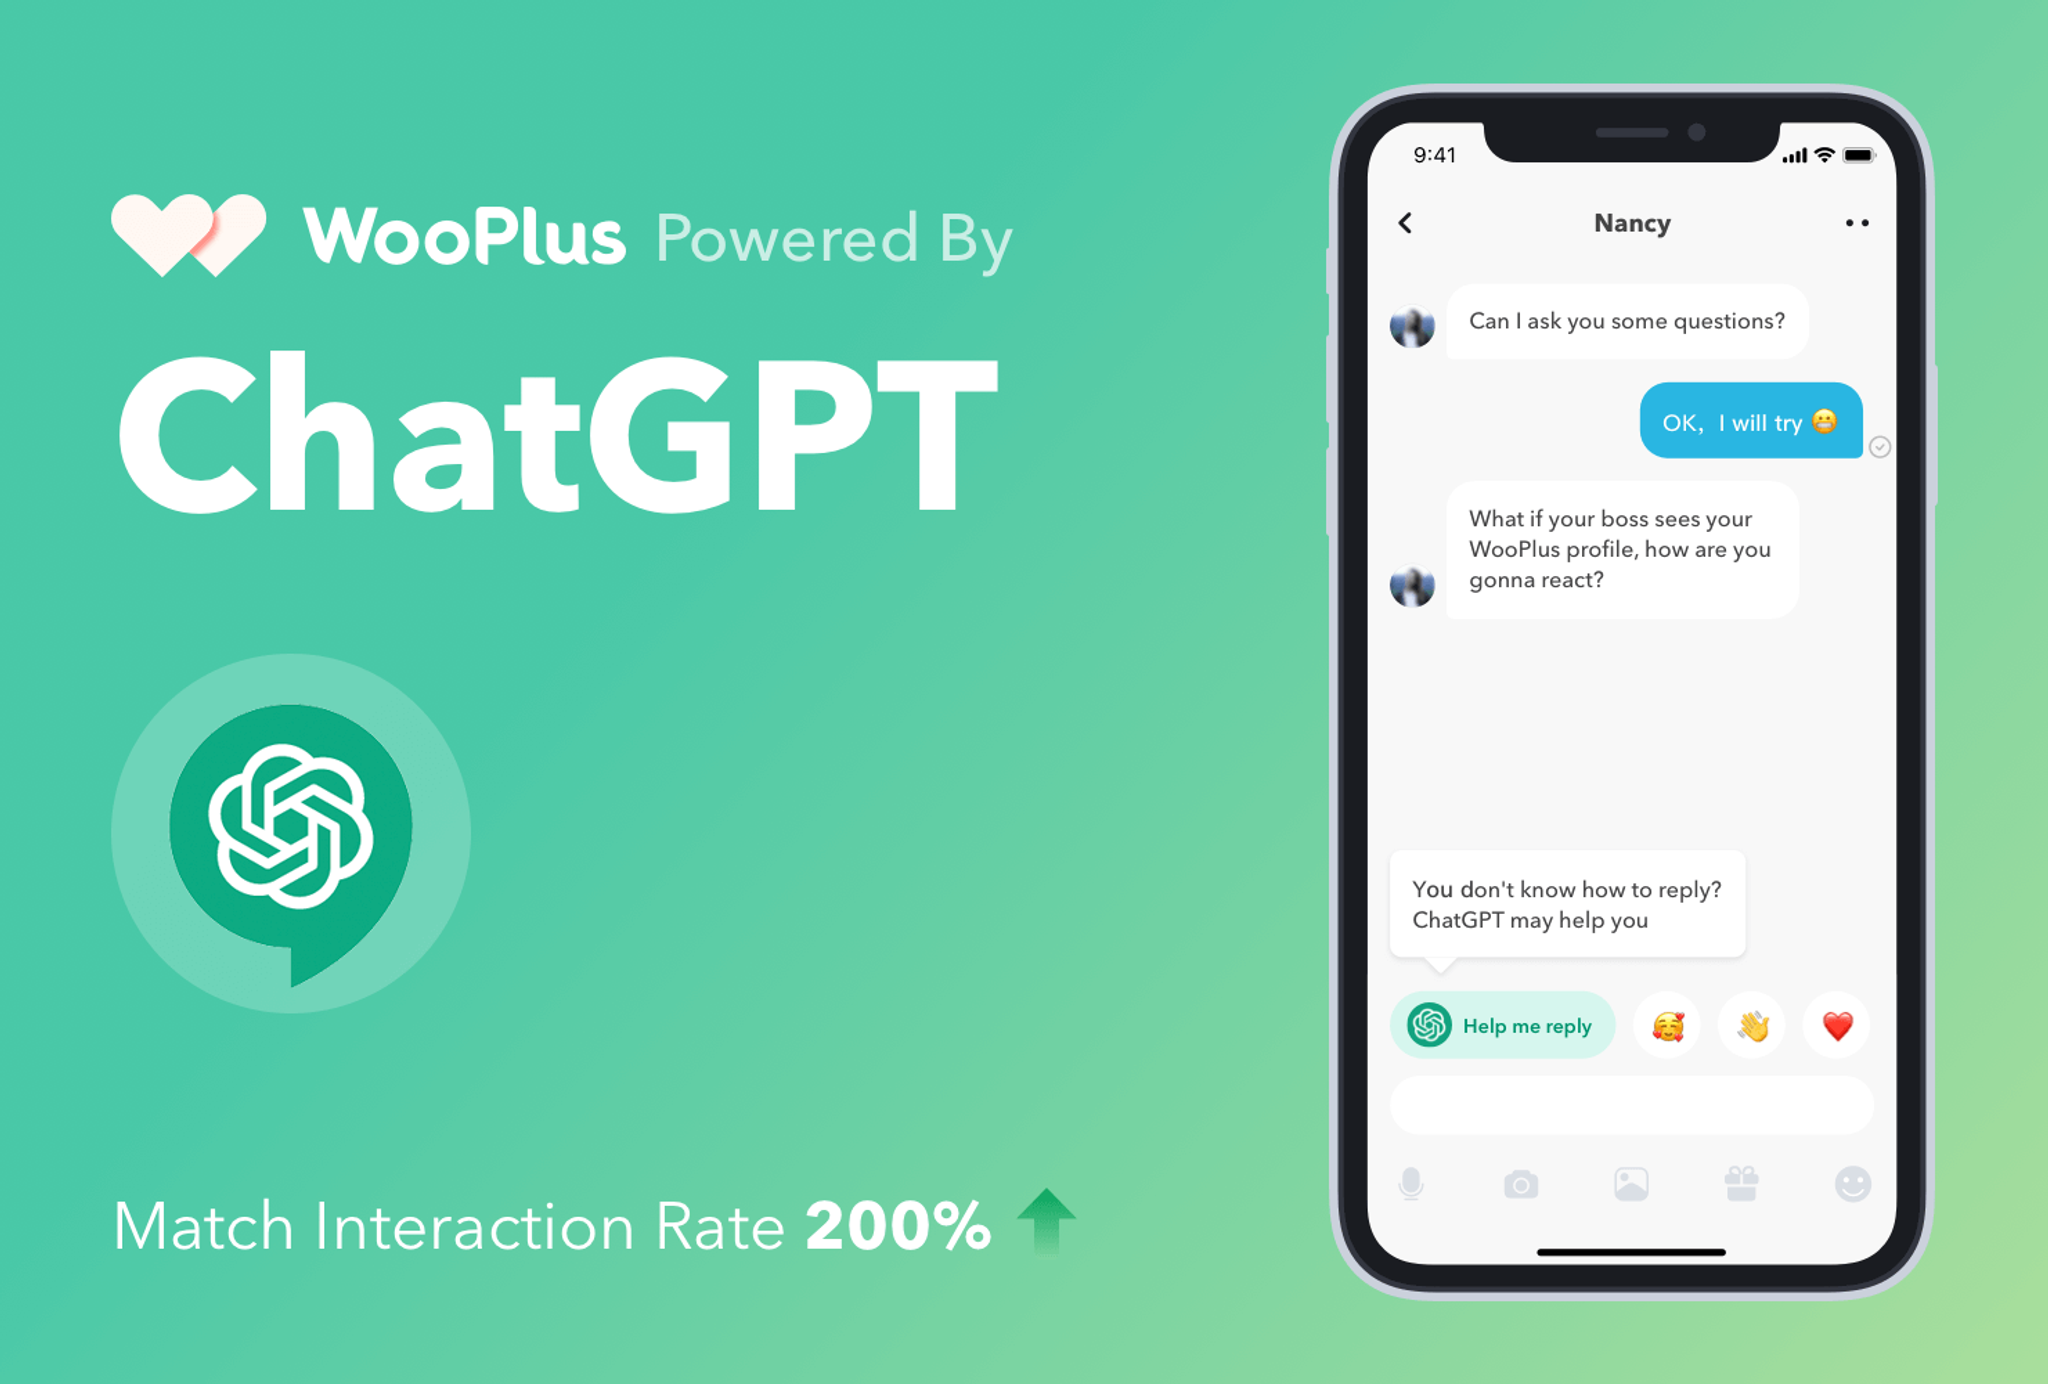 WooPlus Integrated ChatGPT to Help You Date, Boosted Match Interaction by 200%